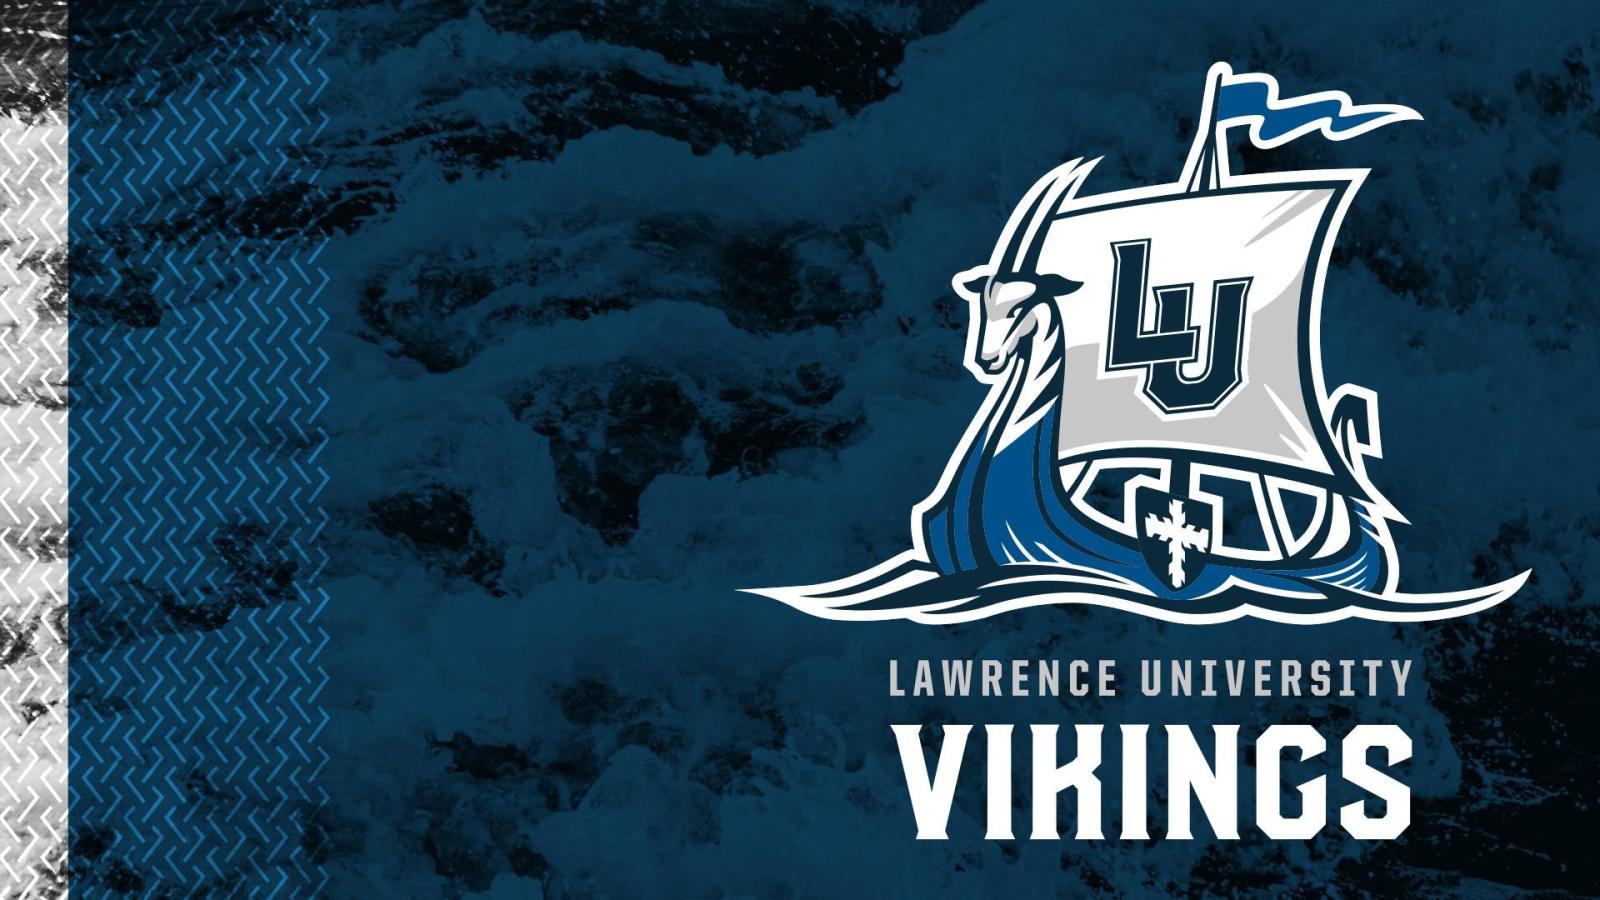 Rectangular image with LU Viking athletics logo and "Lawrence University Vikings" written beneath it on the right-hand side of the image.